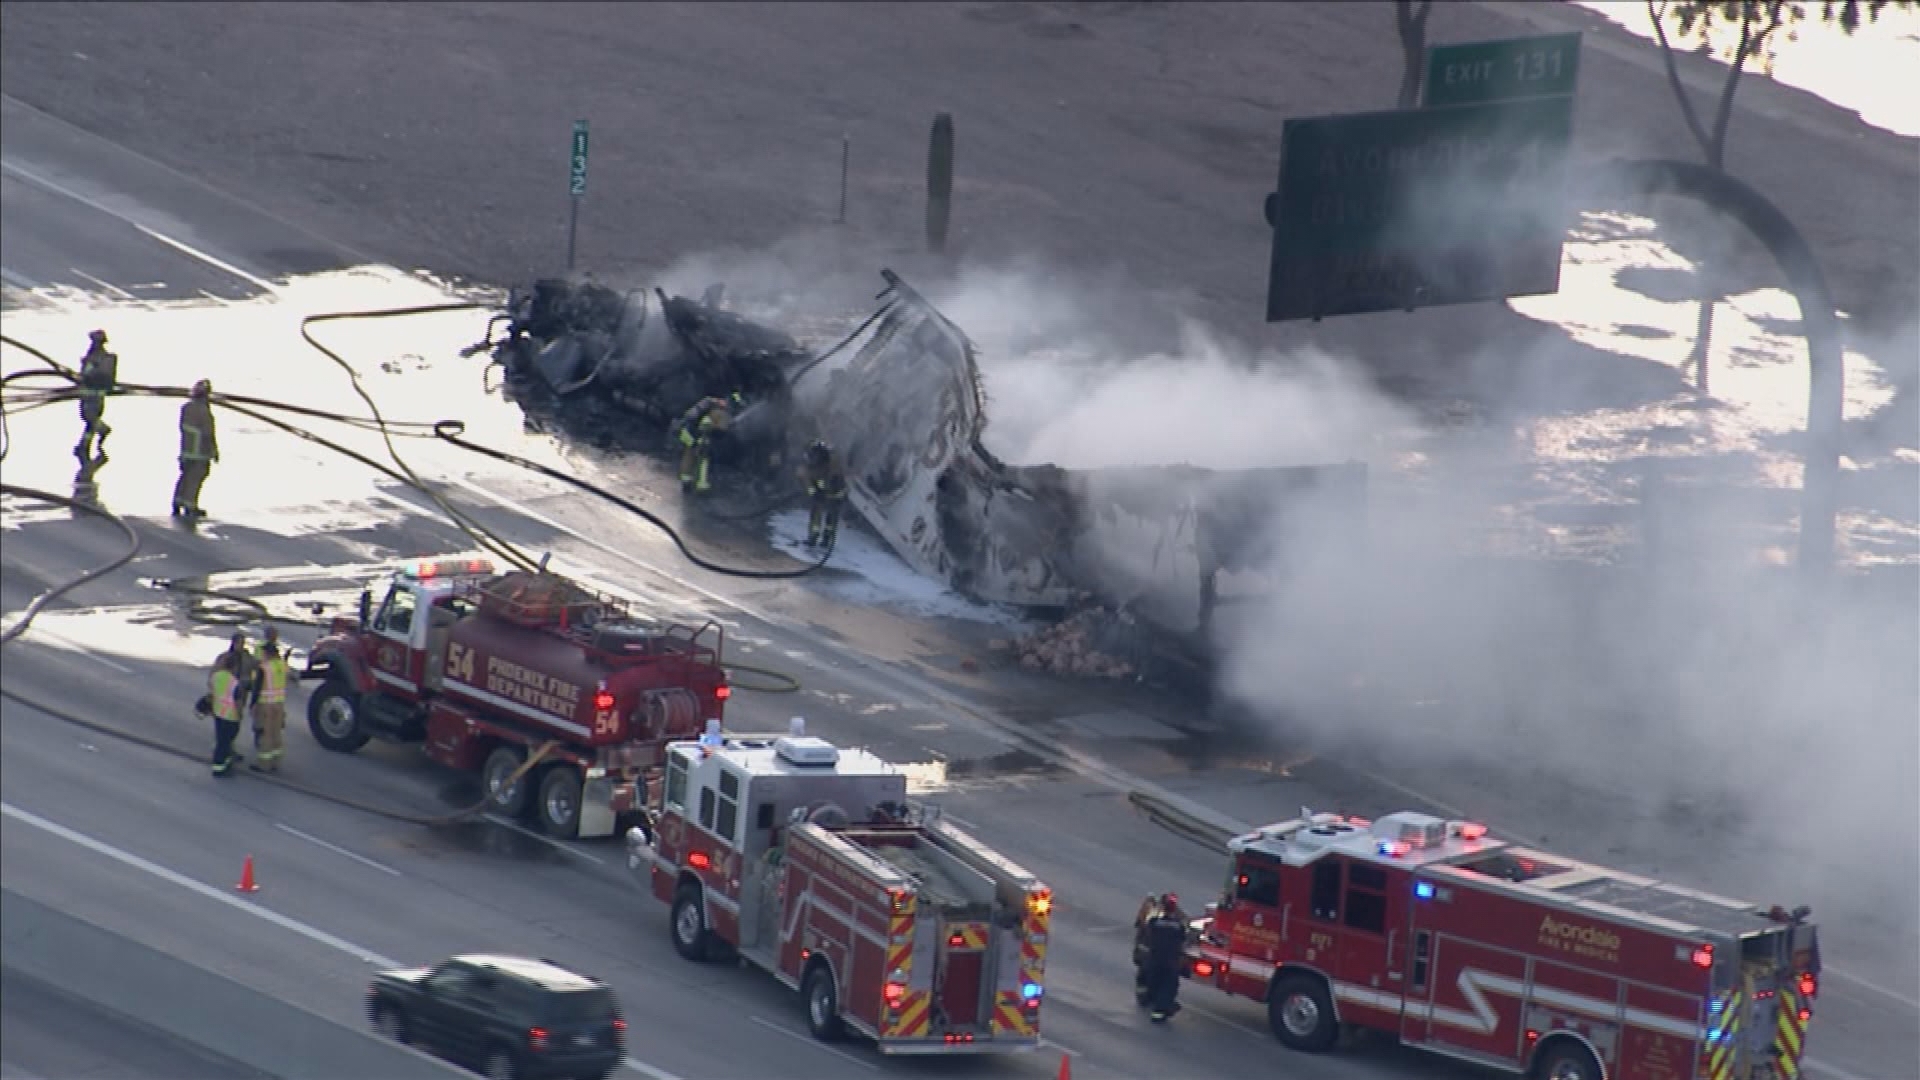 Flames and thick black smoke can be seen coming from a semi.